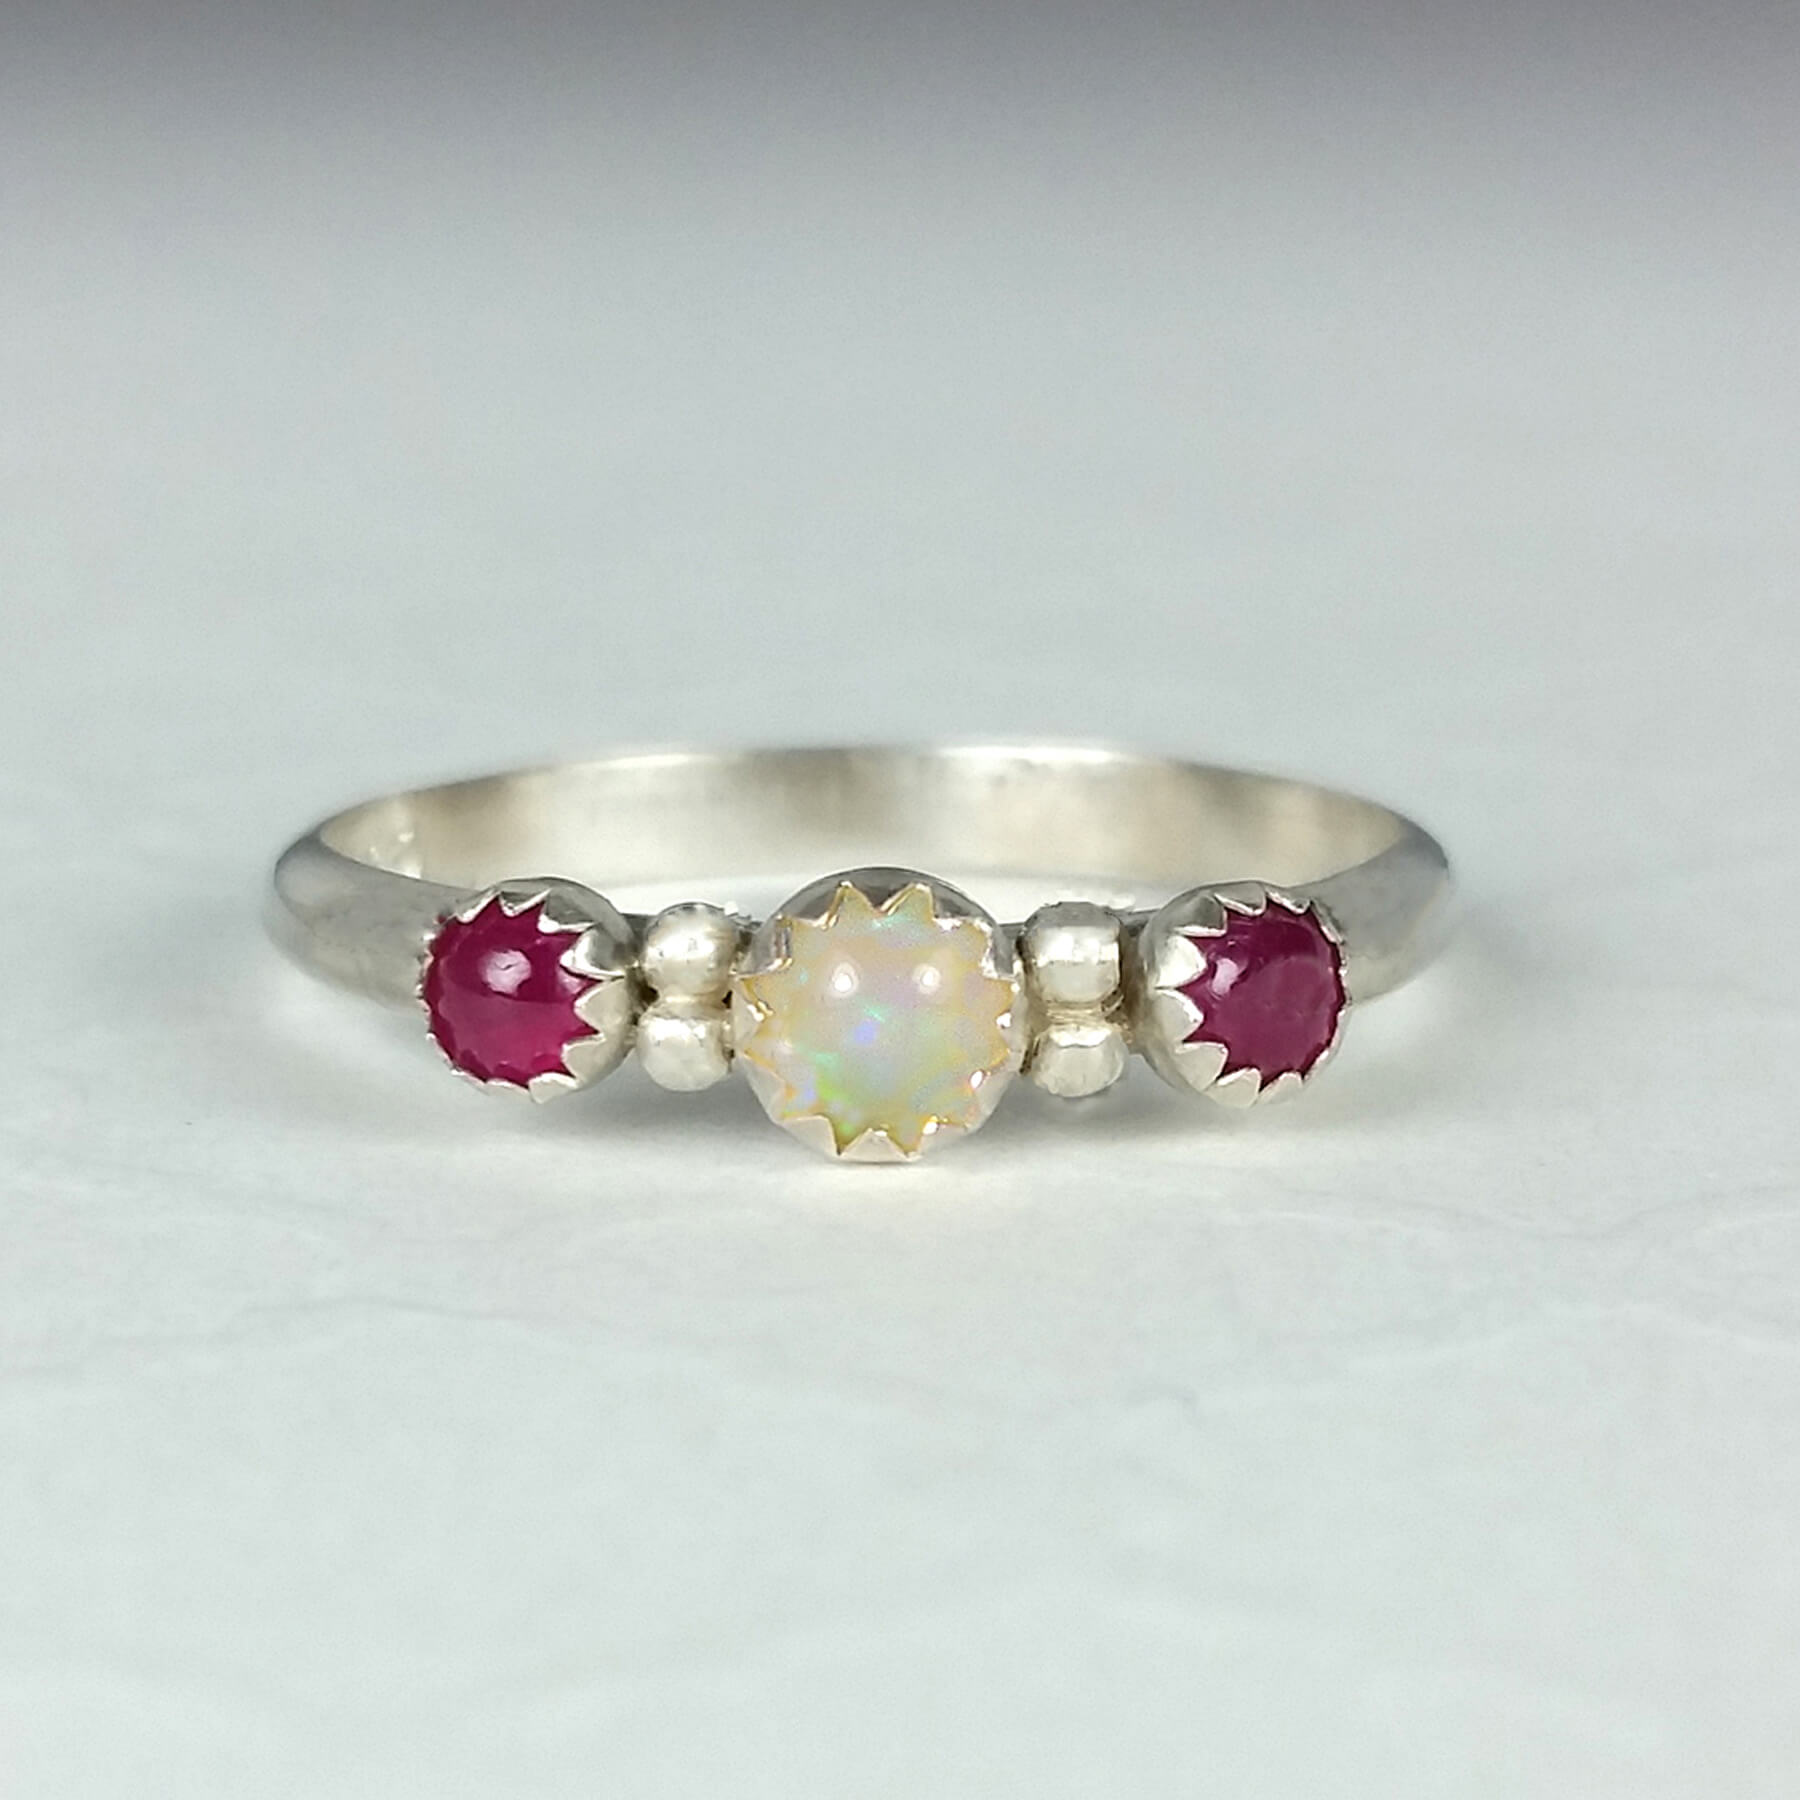 Sunlight and Mist Opal and Ruby Ring - Size 7.5